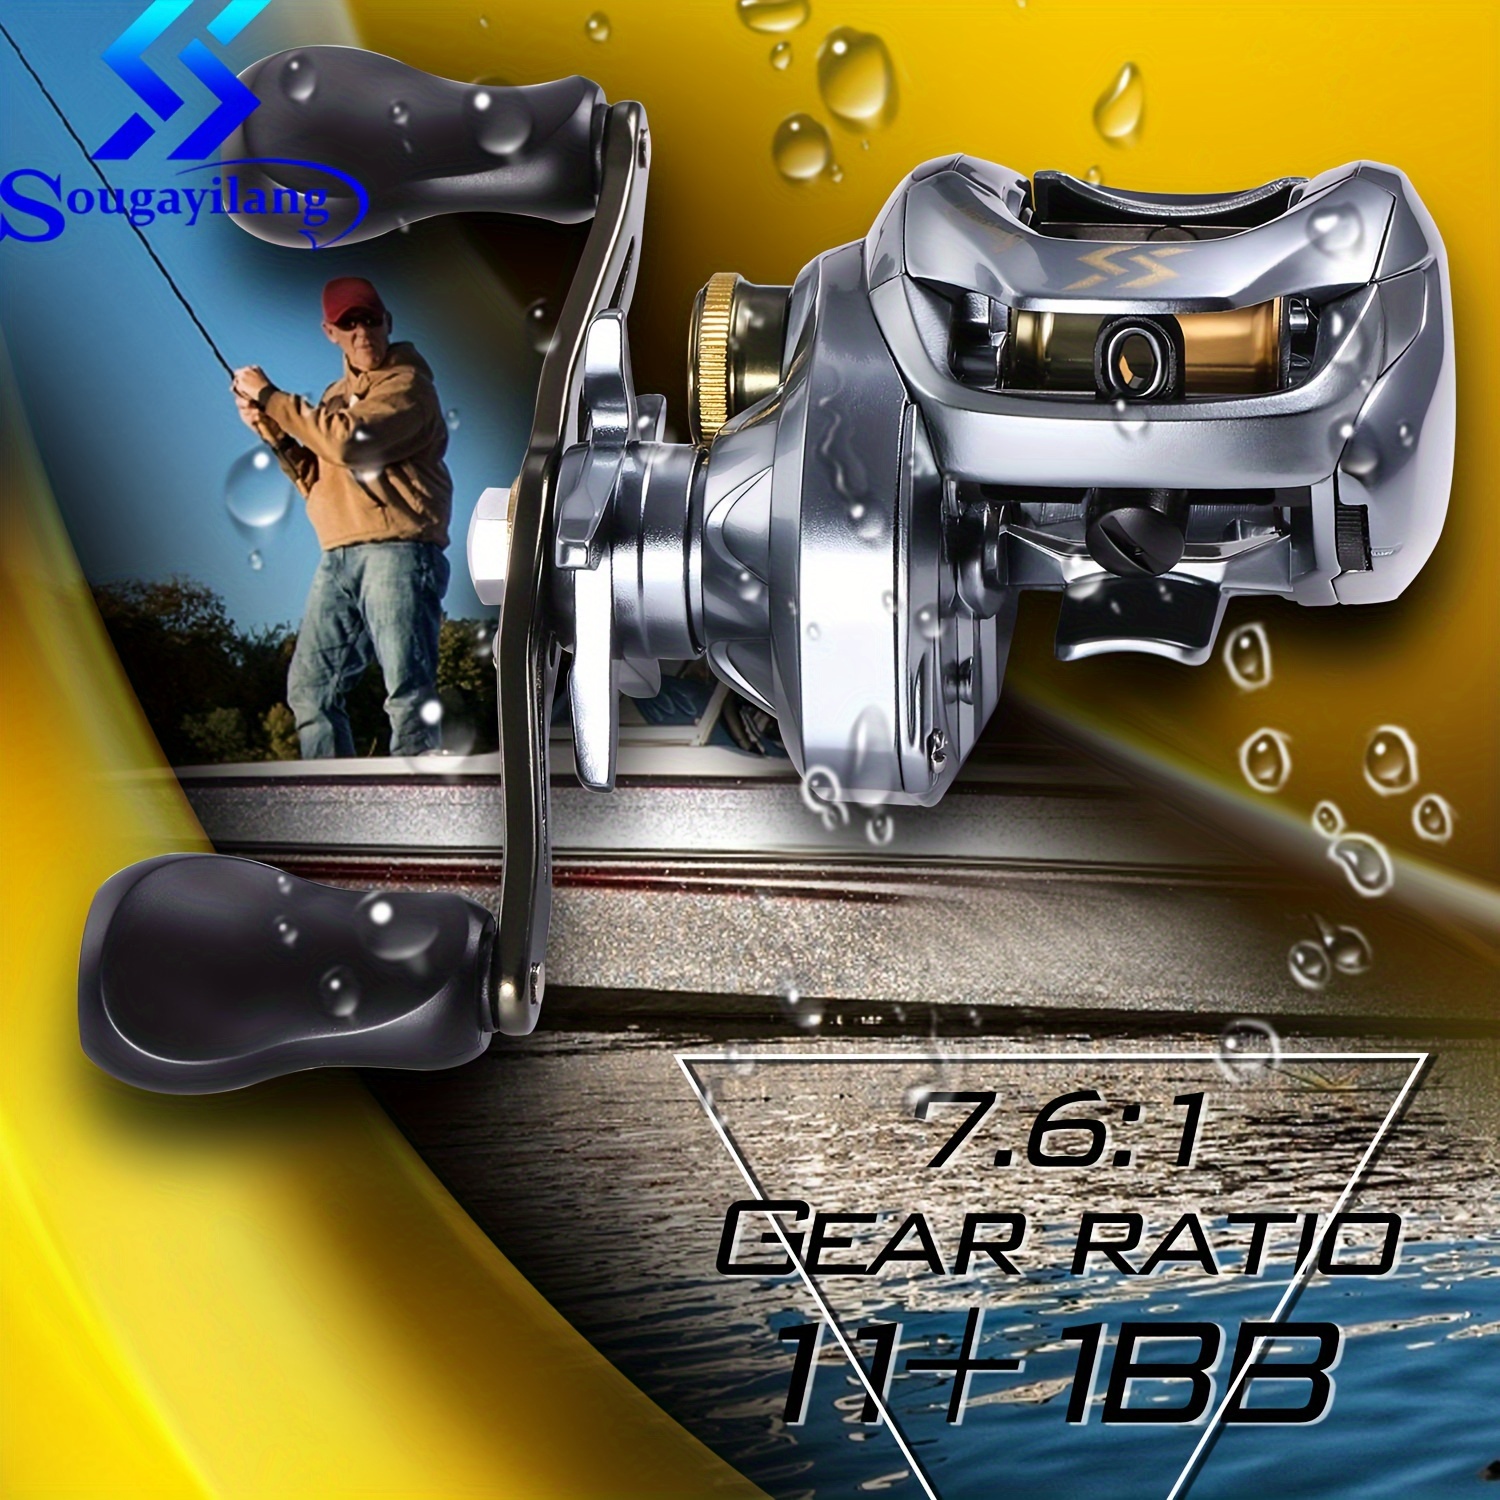 

Sougayilang Baitcasting Reel 11+1 Stainless Steel Ball Bearings 7.6:1 Gear Ratio High-speed Fishing Reel With Magnetic Brake Syestem Left/right Optional Powerful Bait Casting Fishing Reels